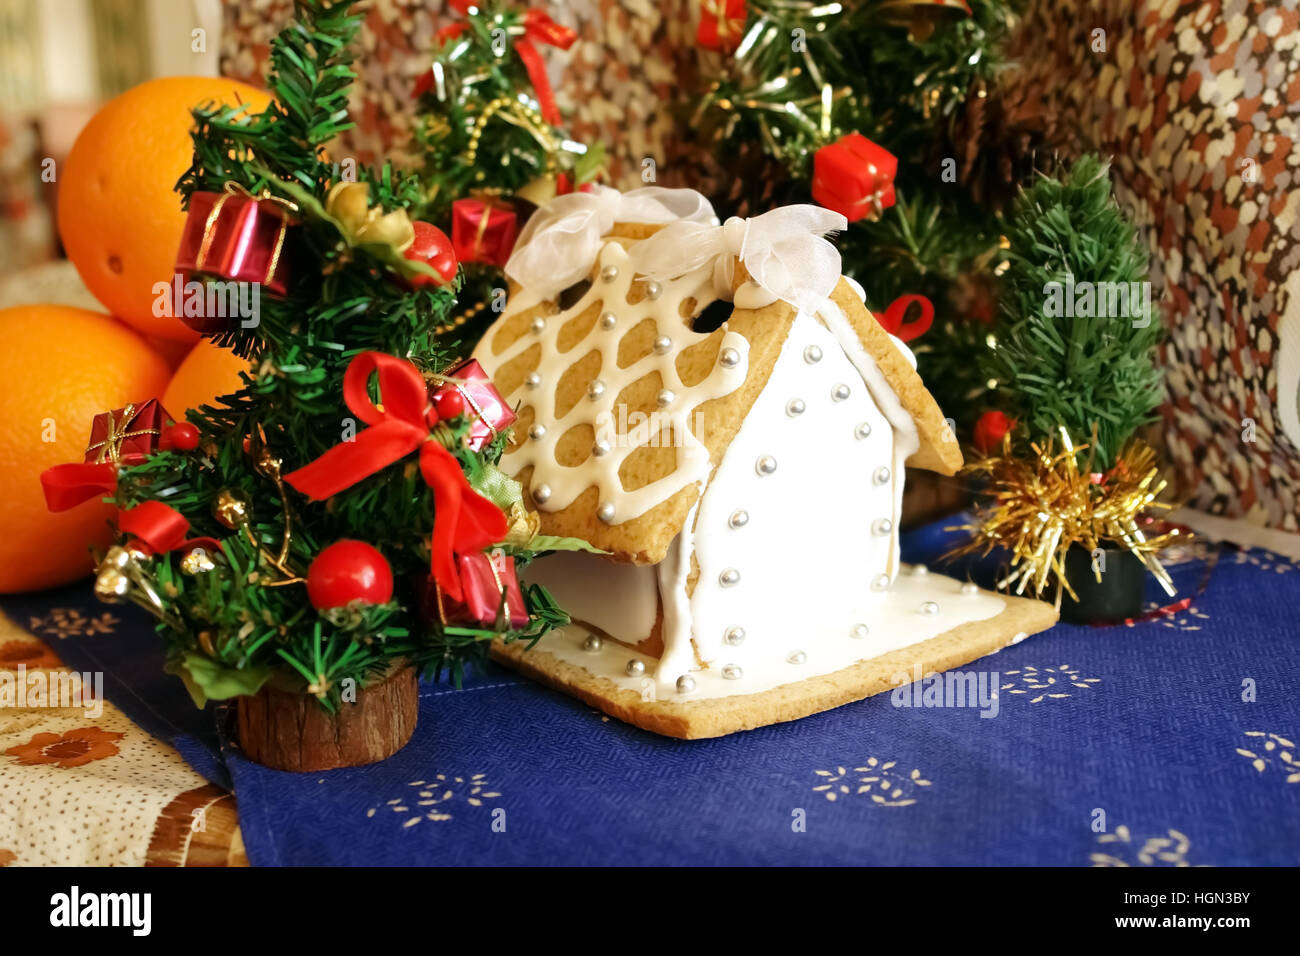 Composition with ginger house, Christmas gifts, Christmas trees and oranges. Stock Photo